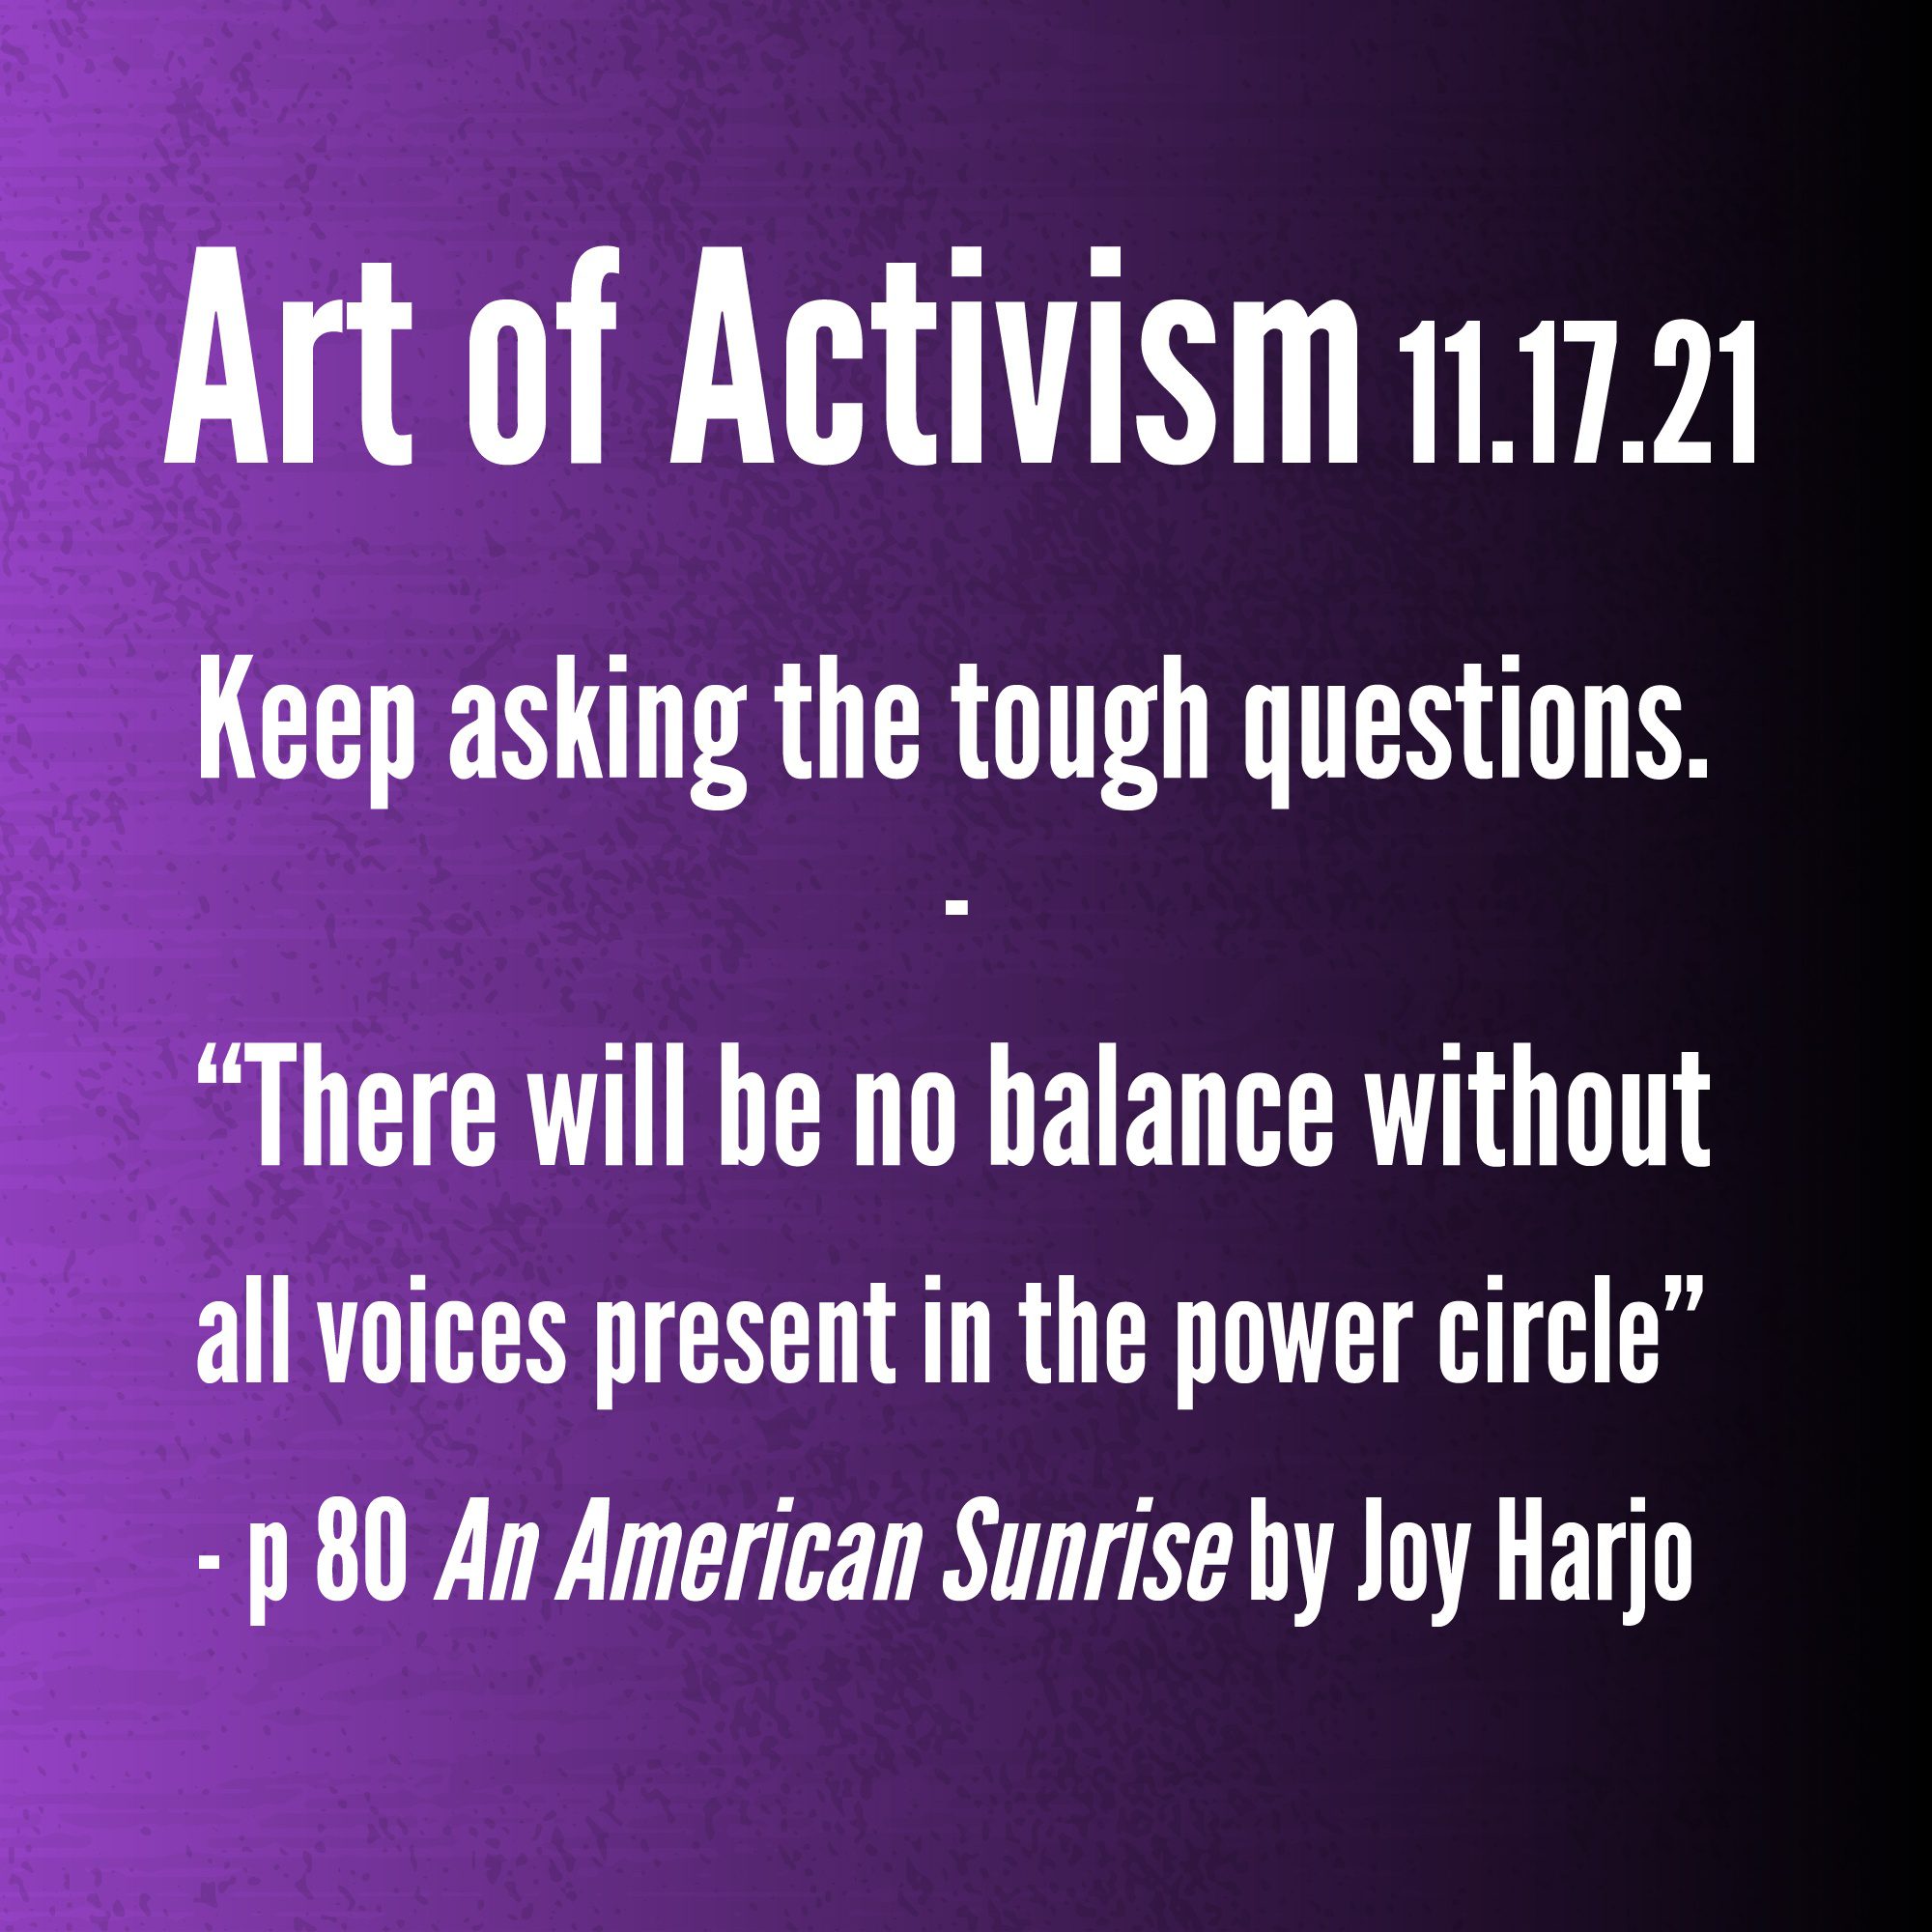 Art of Activism November 17, 2021. Keep asking the tough questions. "There will be no balance without all voices present in the power circle" - page 80 of An American Sunrise by Joy Harjo.